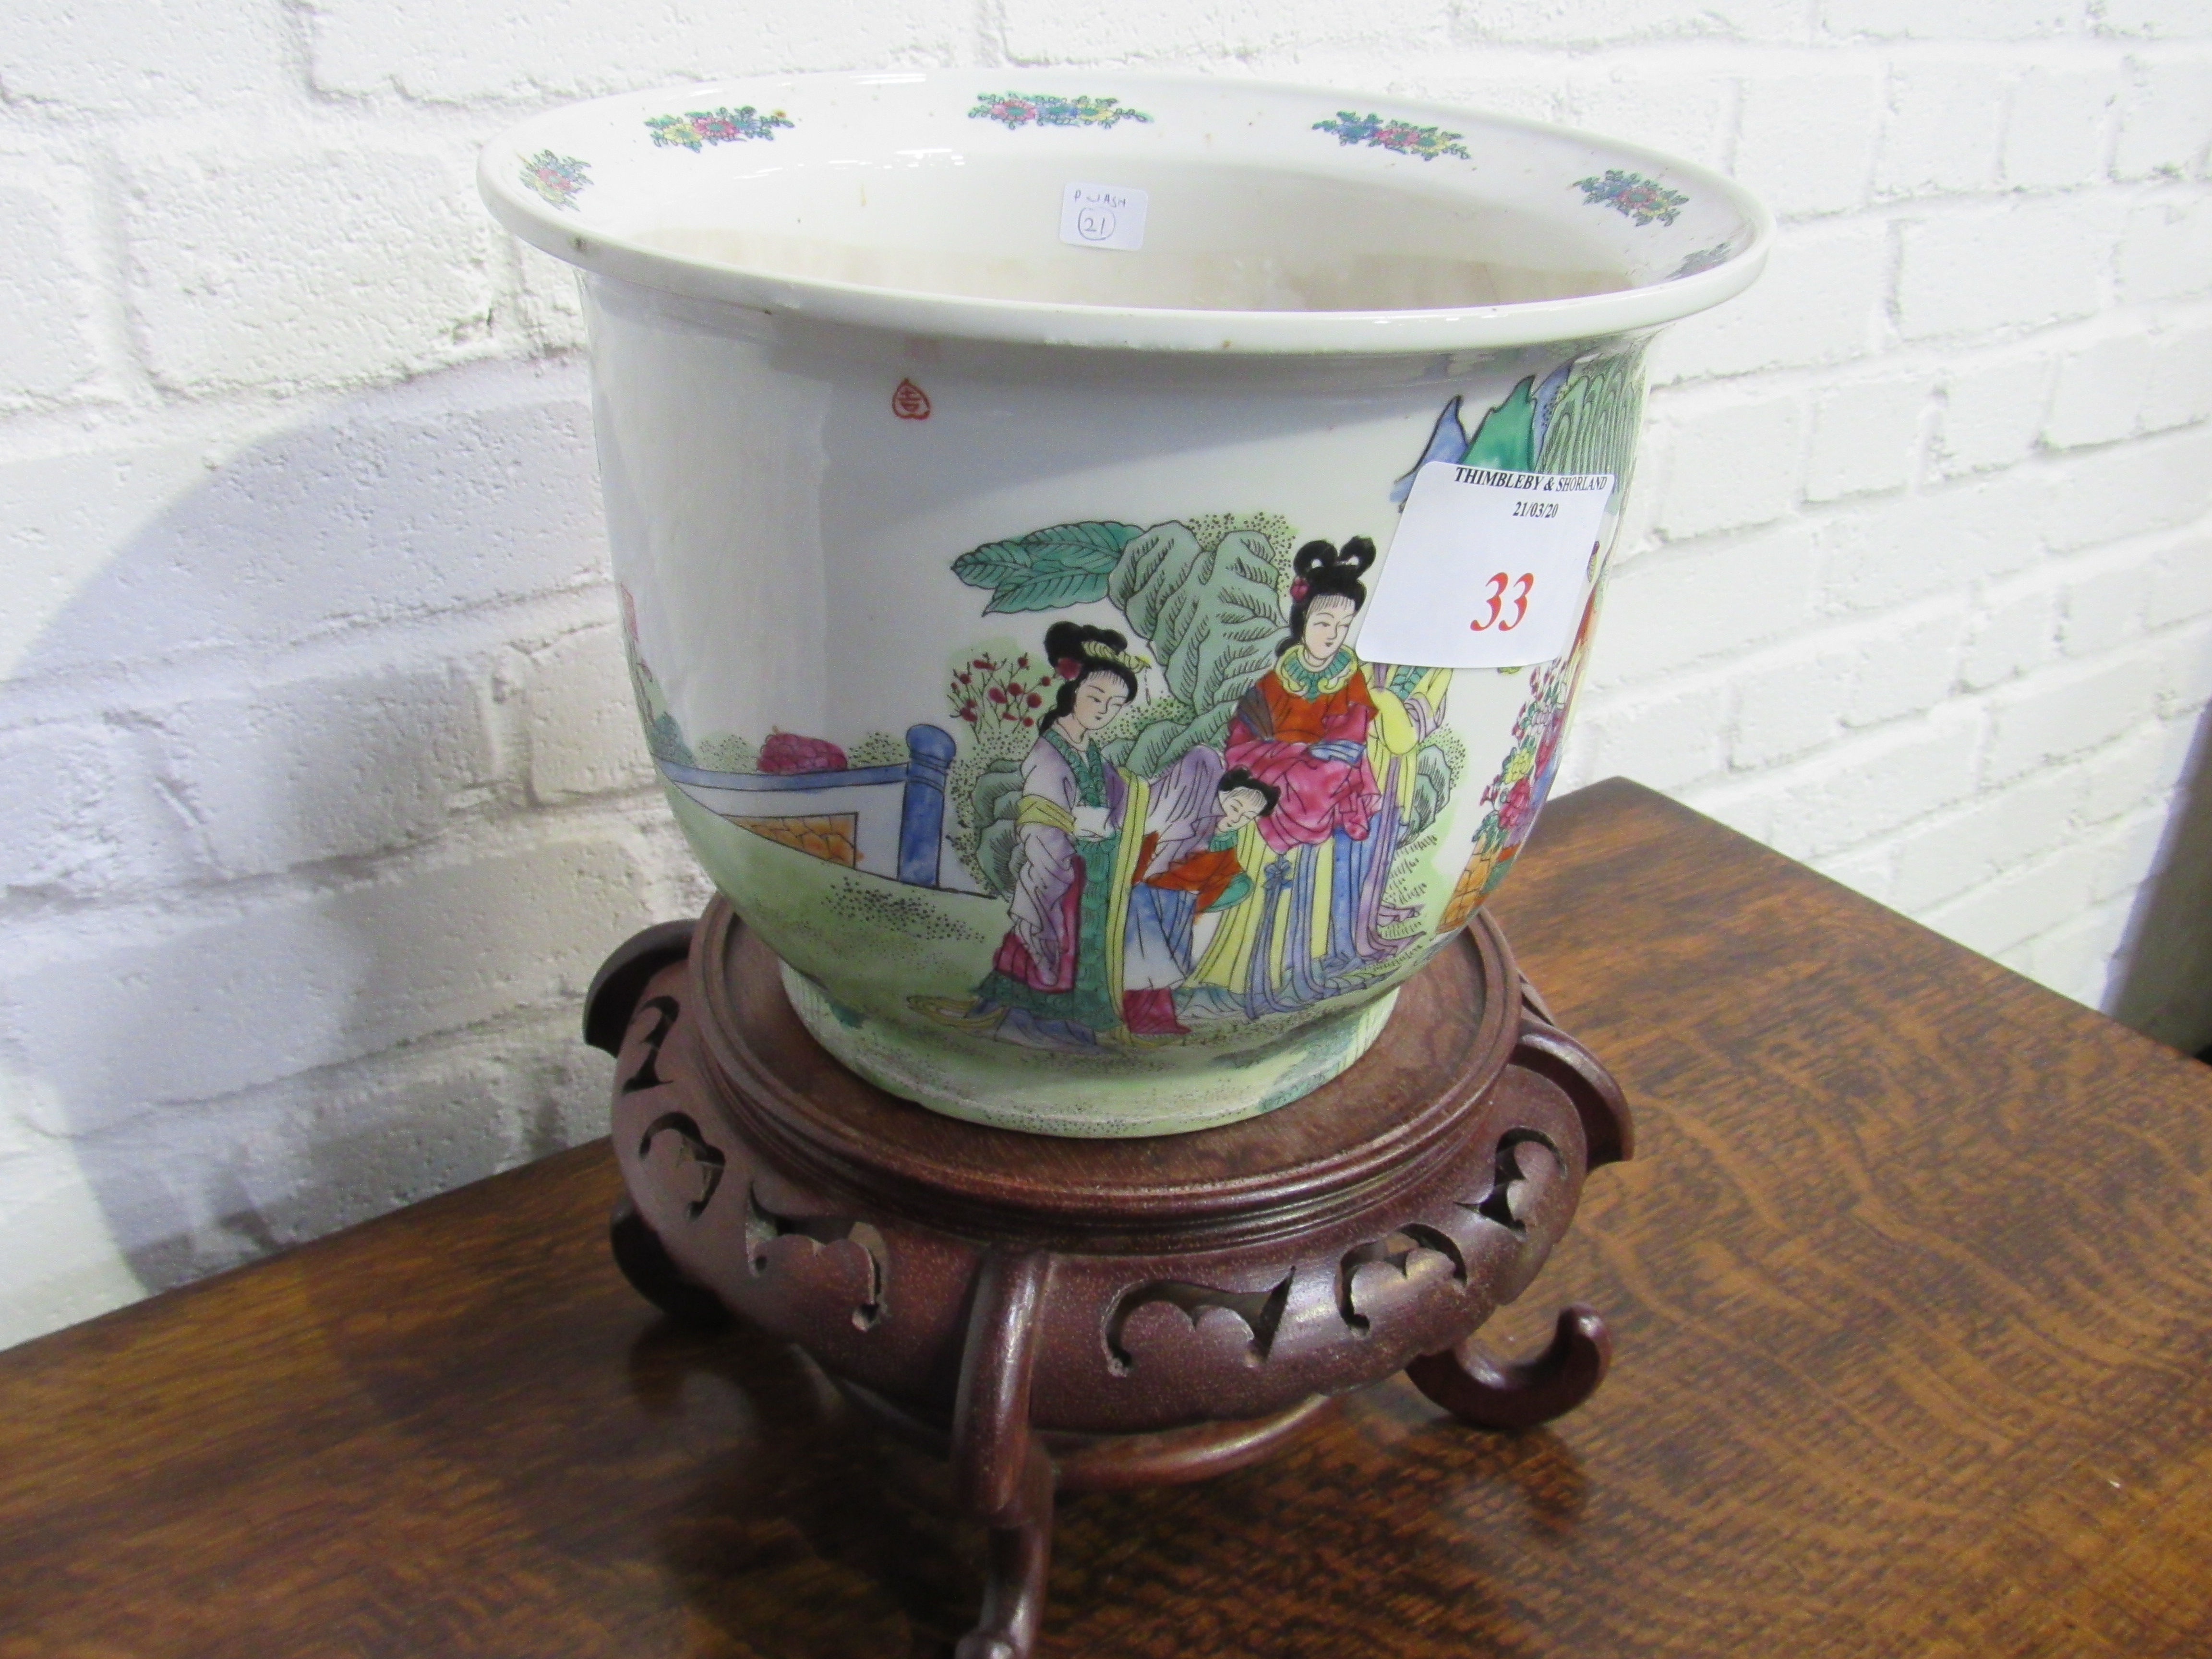 Large round Chinese Famille Verte fish bowl or Jardinière on ornate wood stand. Estimate £30-50. - Image 3 of 3